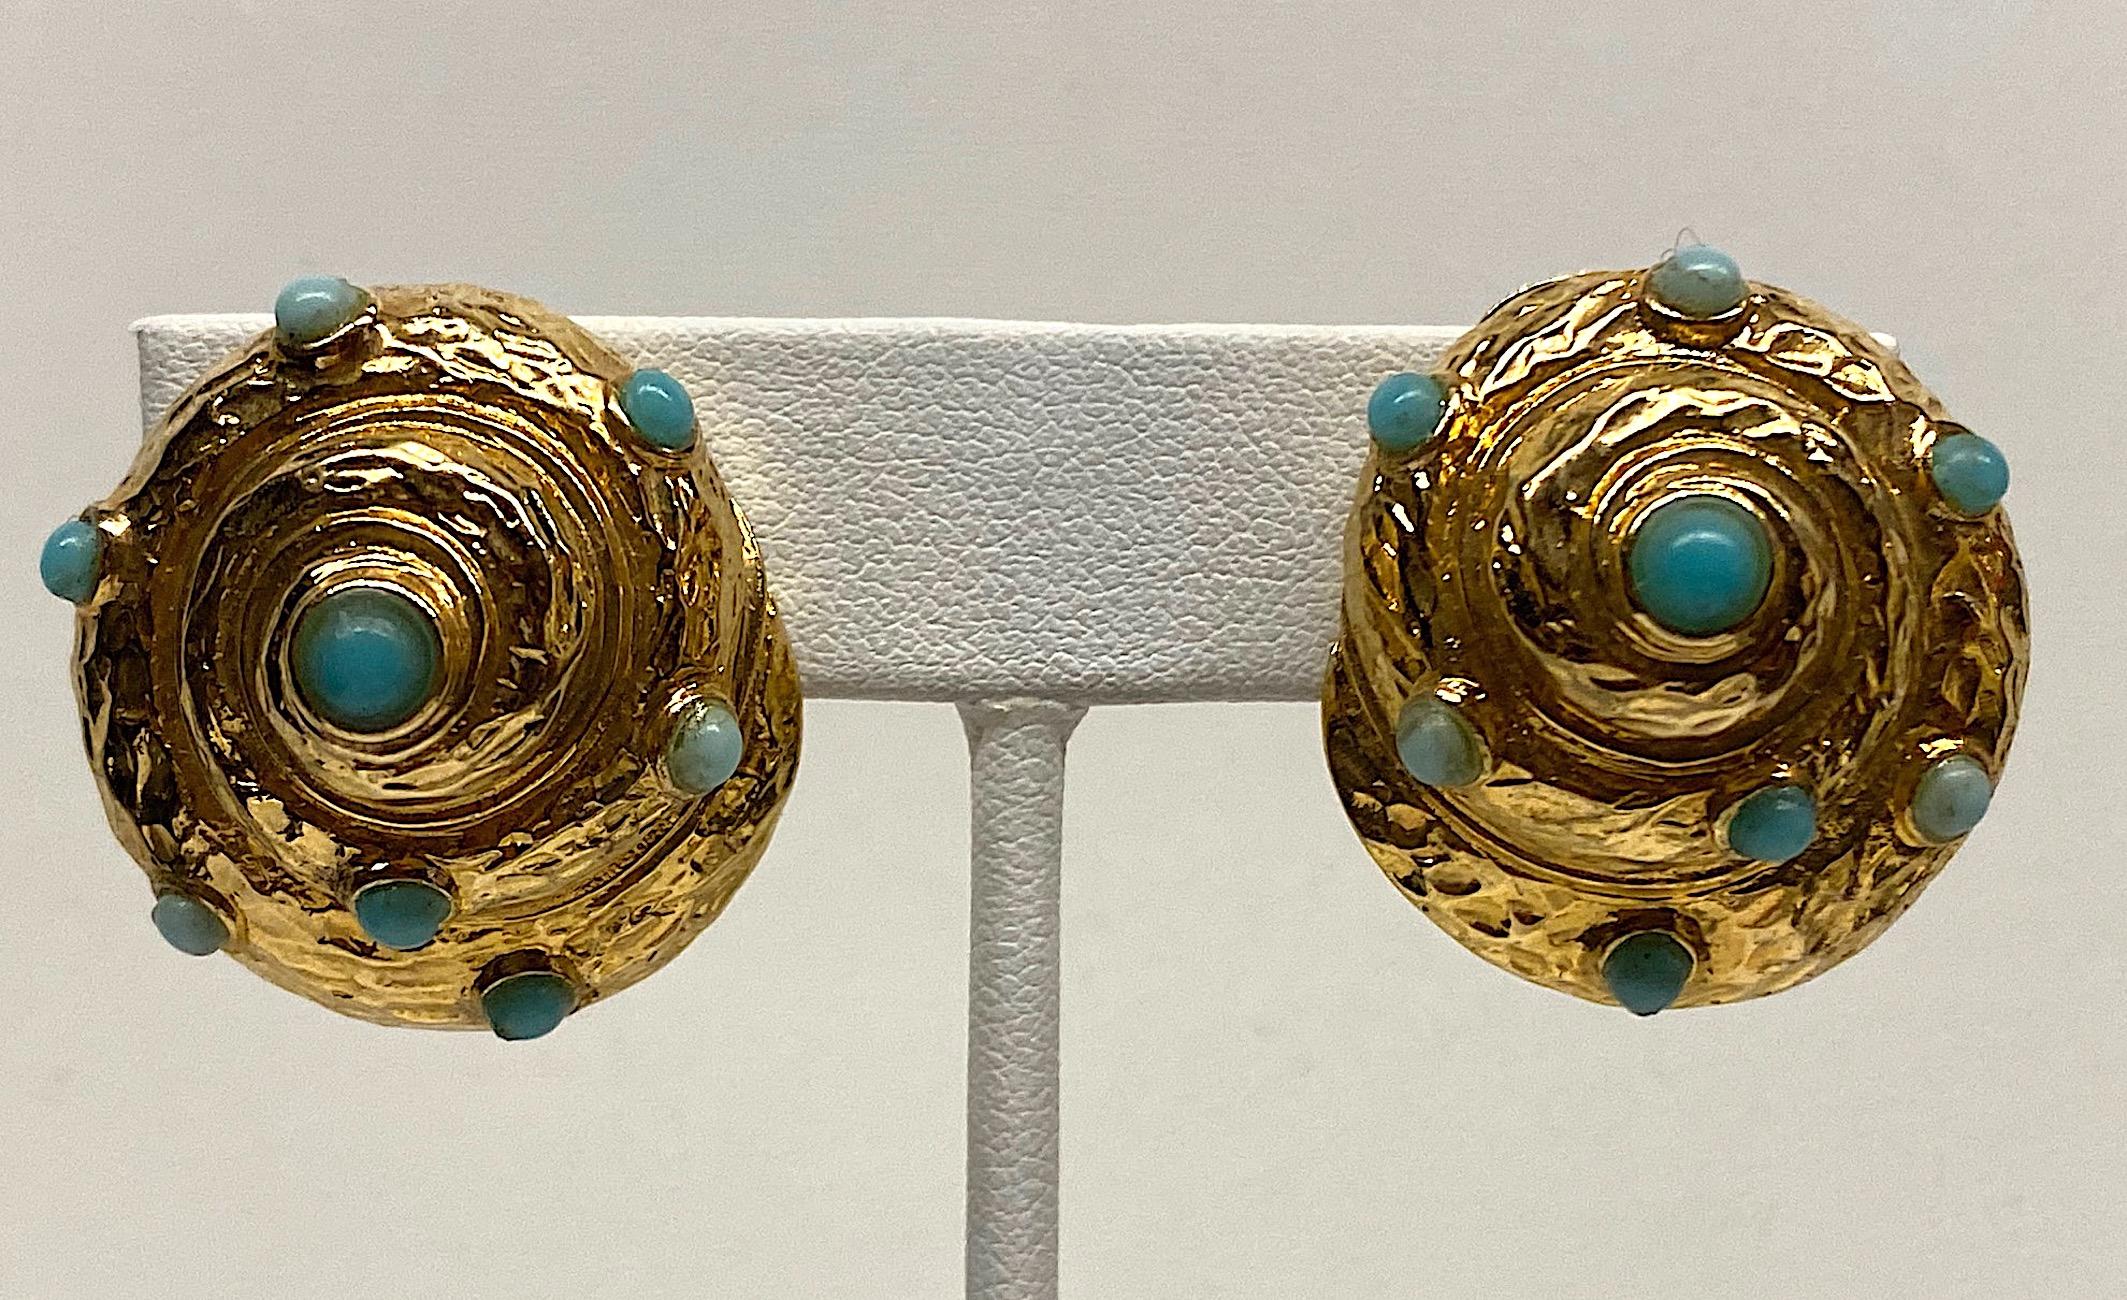 A nicely carved and detailed pair of spiral sea shell earrings circa 1980. The earrings are gold plate and set with two shades of faux turquoise cabochons. Each clip earring measures 1 inches wide, 1.13 inches tall and .5 of an inch high / deep not